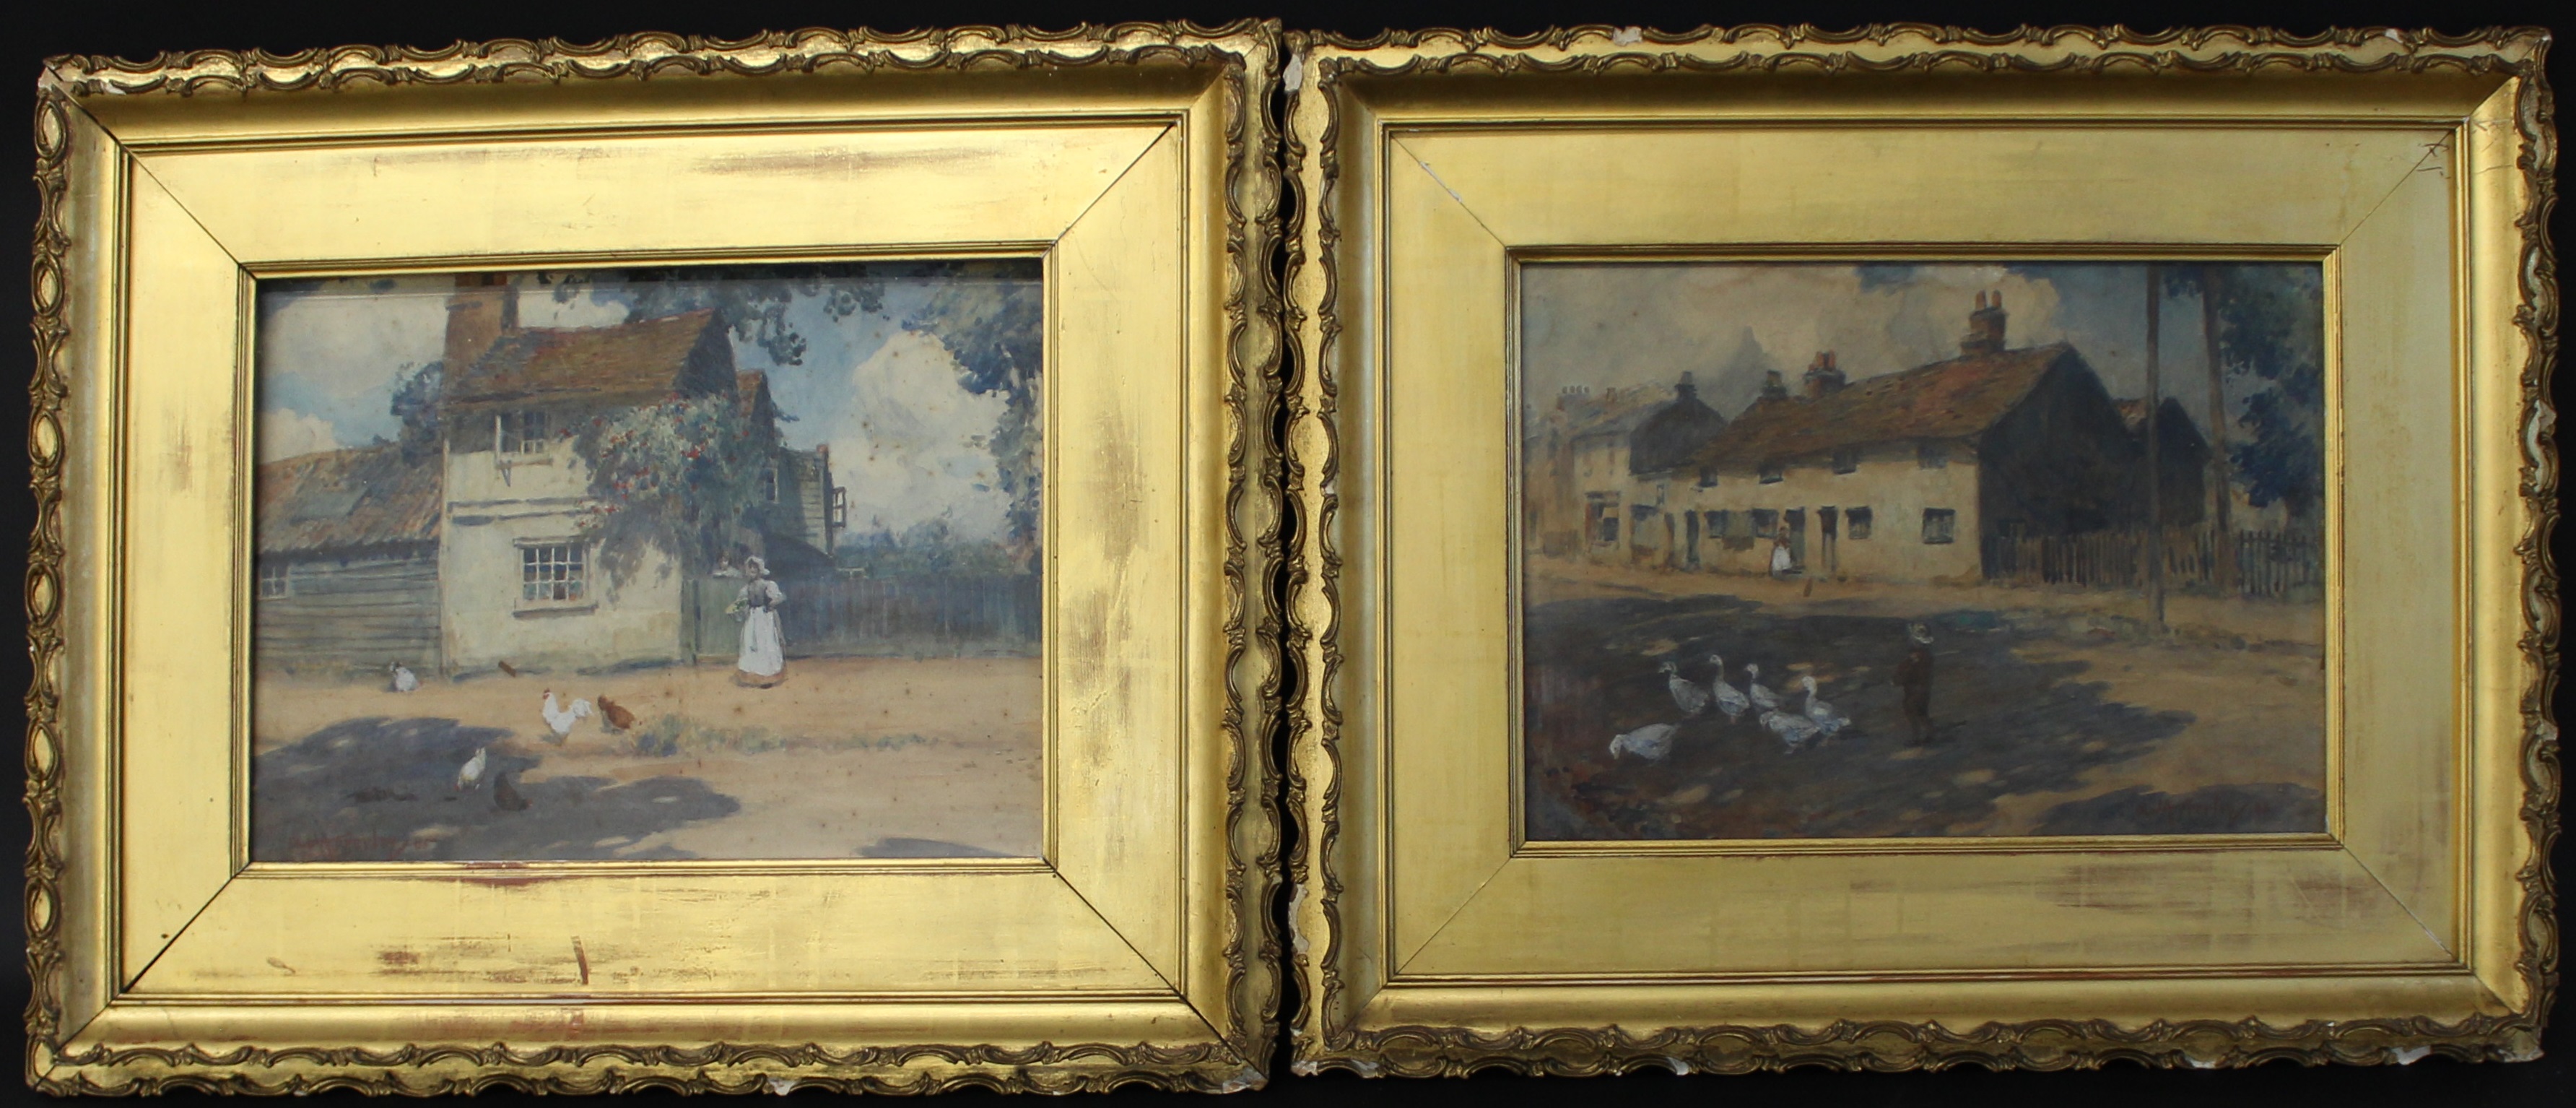 Pair of gilt framed watercolours depicting country cottages, signed Apperley '05 / '06 (possibly